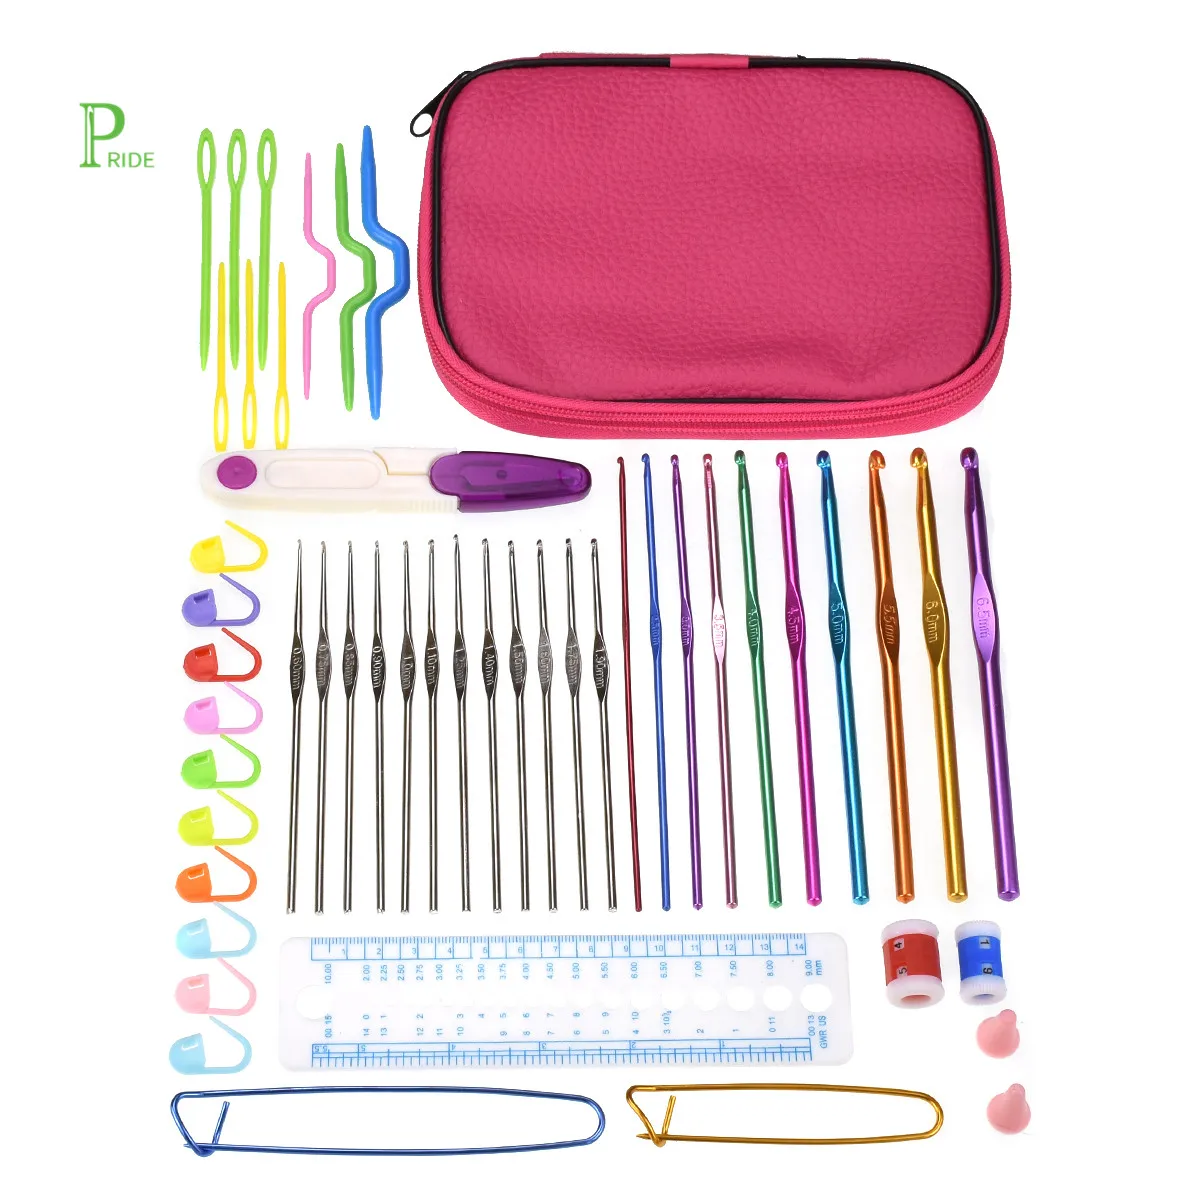 Knitting Tools Crochet Needle Hook Accessories Supplies With Case Knit Kit New 